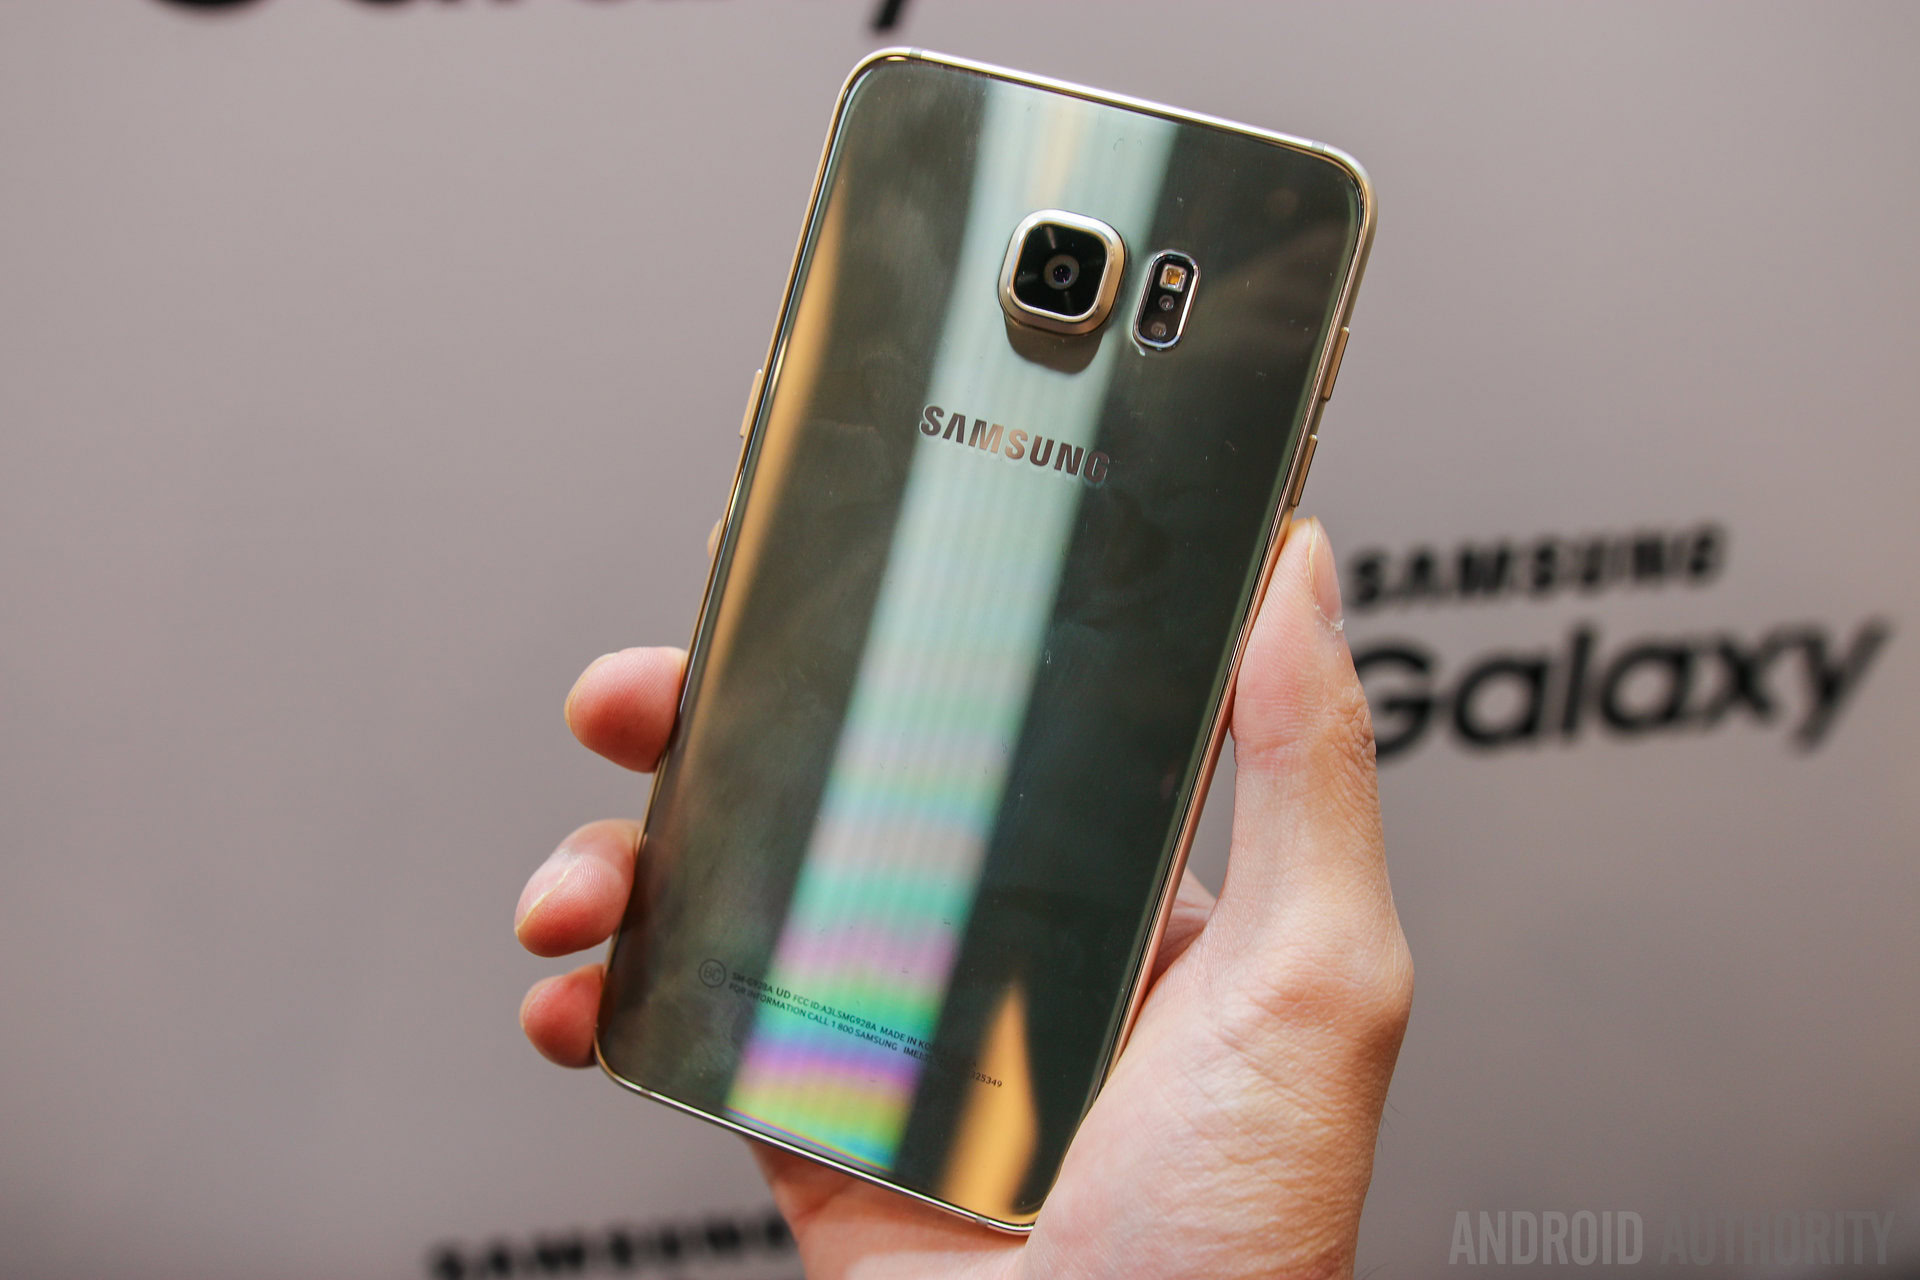 Samsung Galaxy S6 hands-on and first